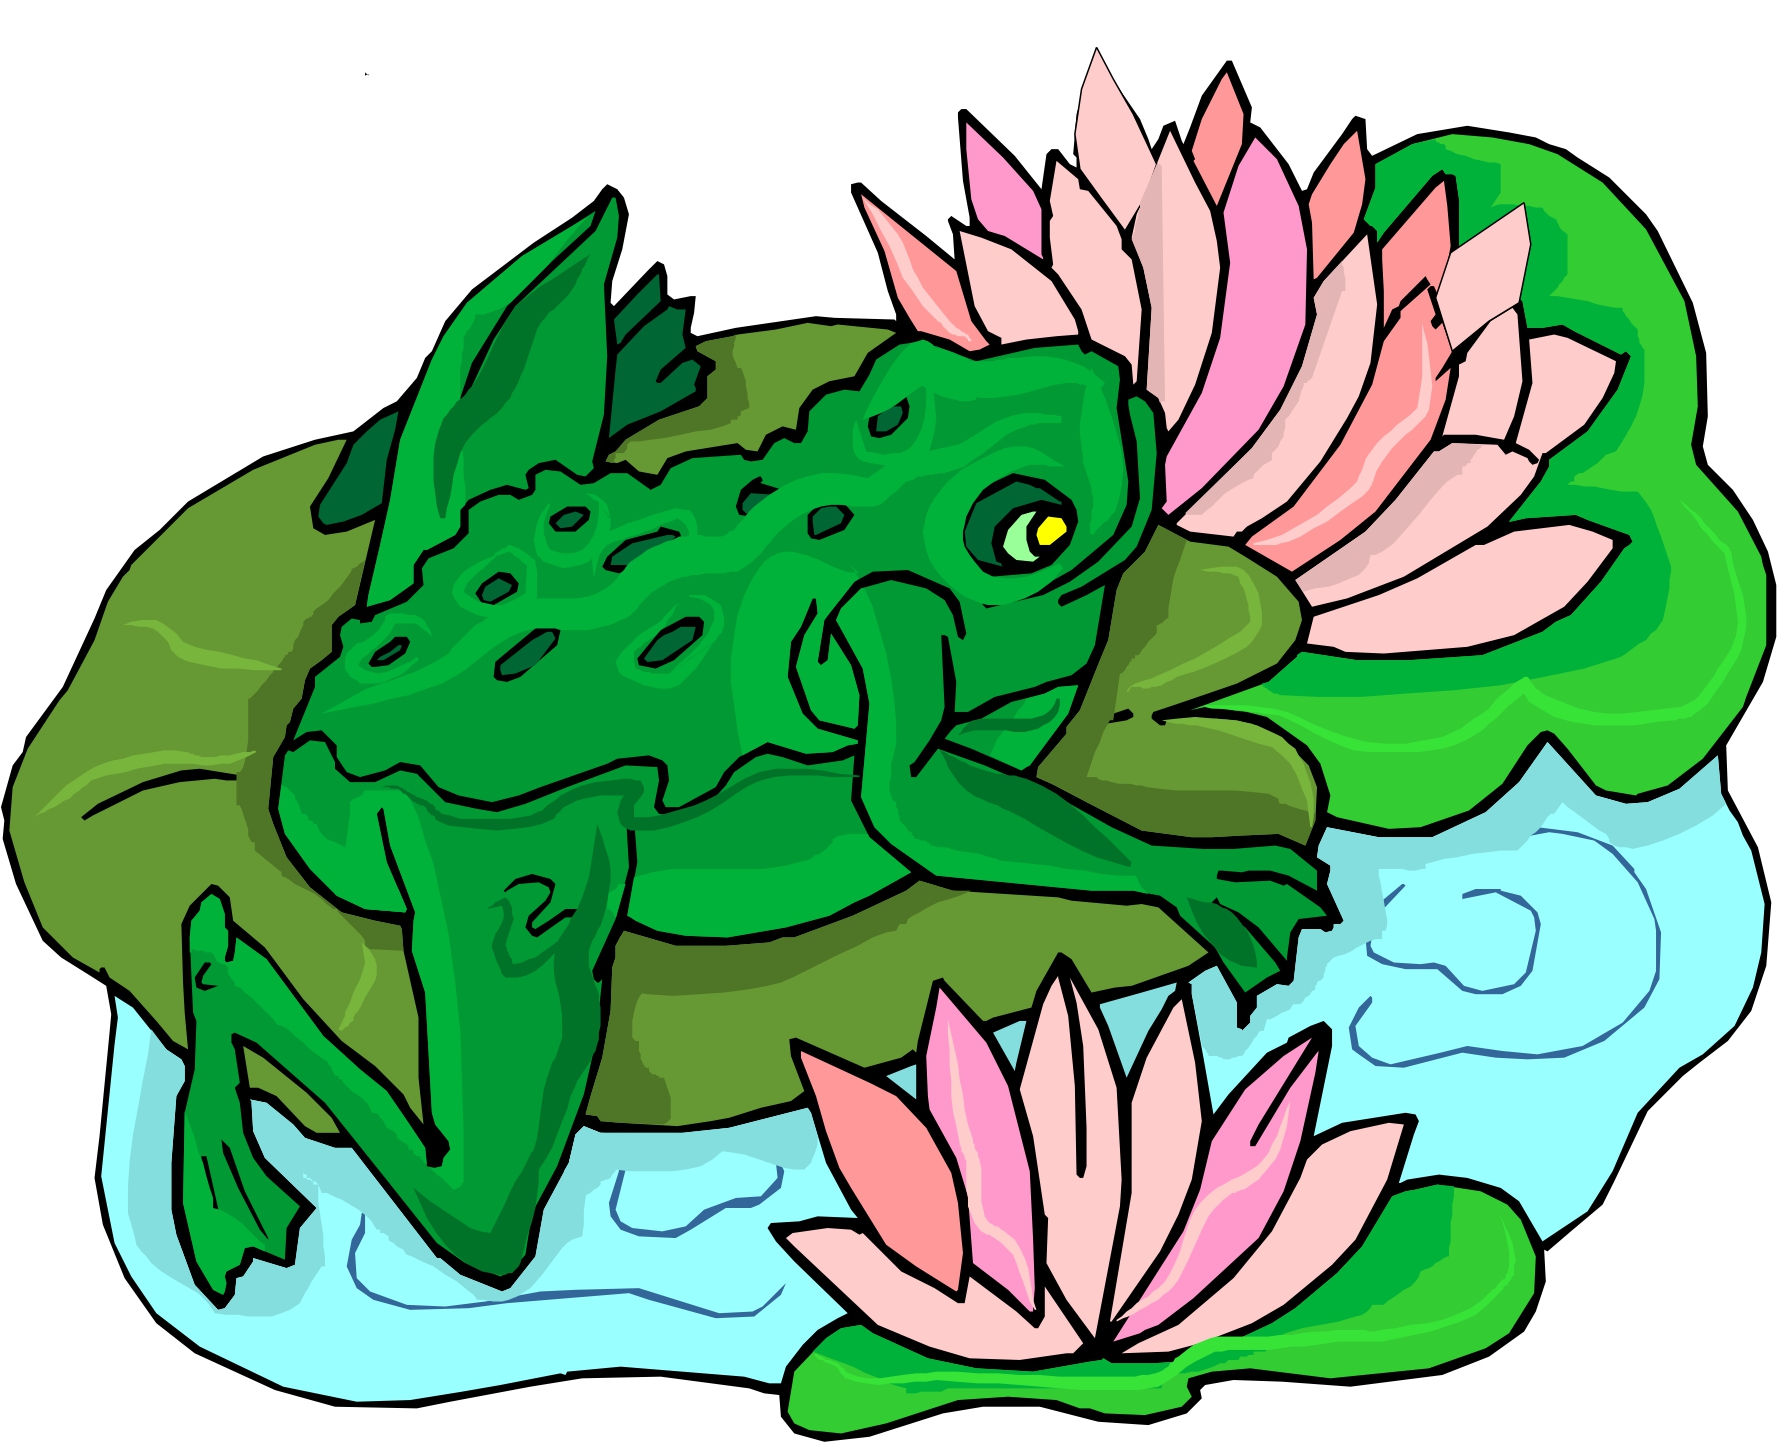 Cartoon Frogs On Lily Pads Images & Pictures - Becuo